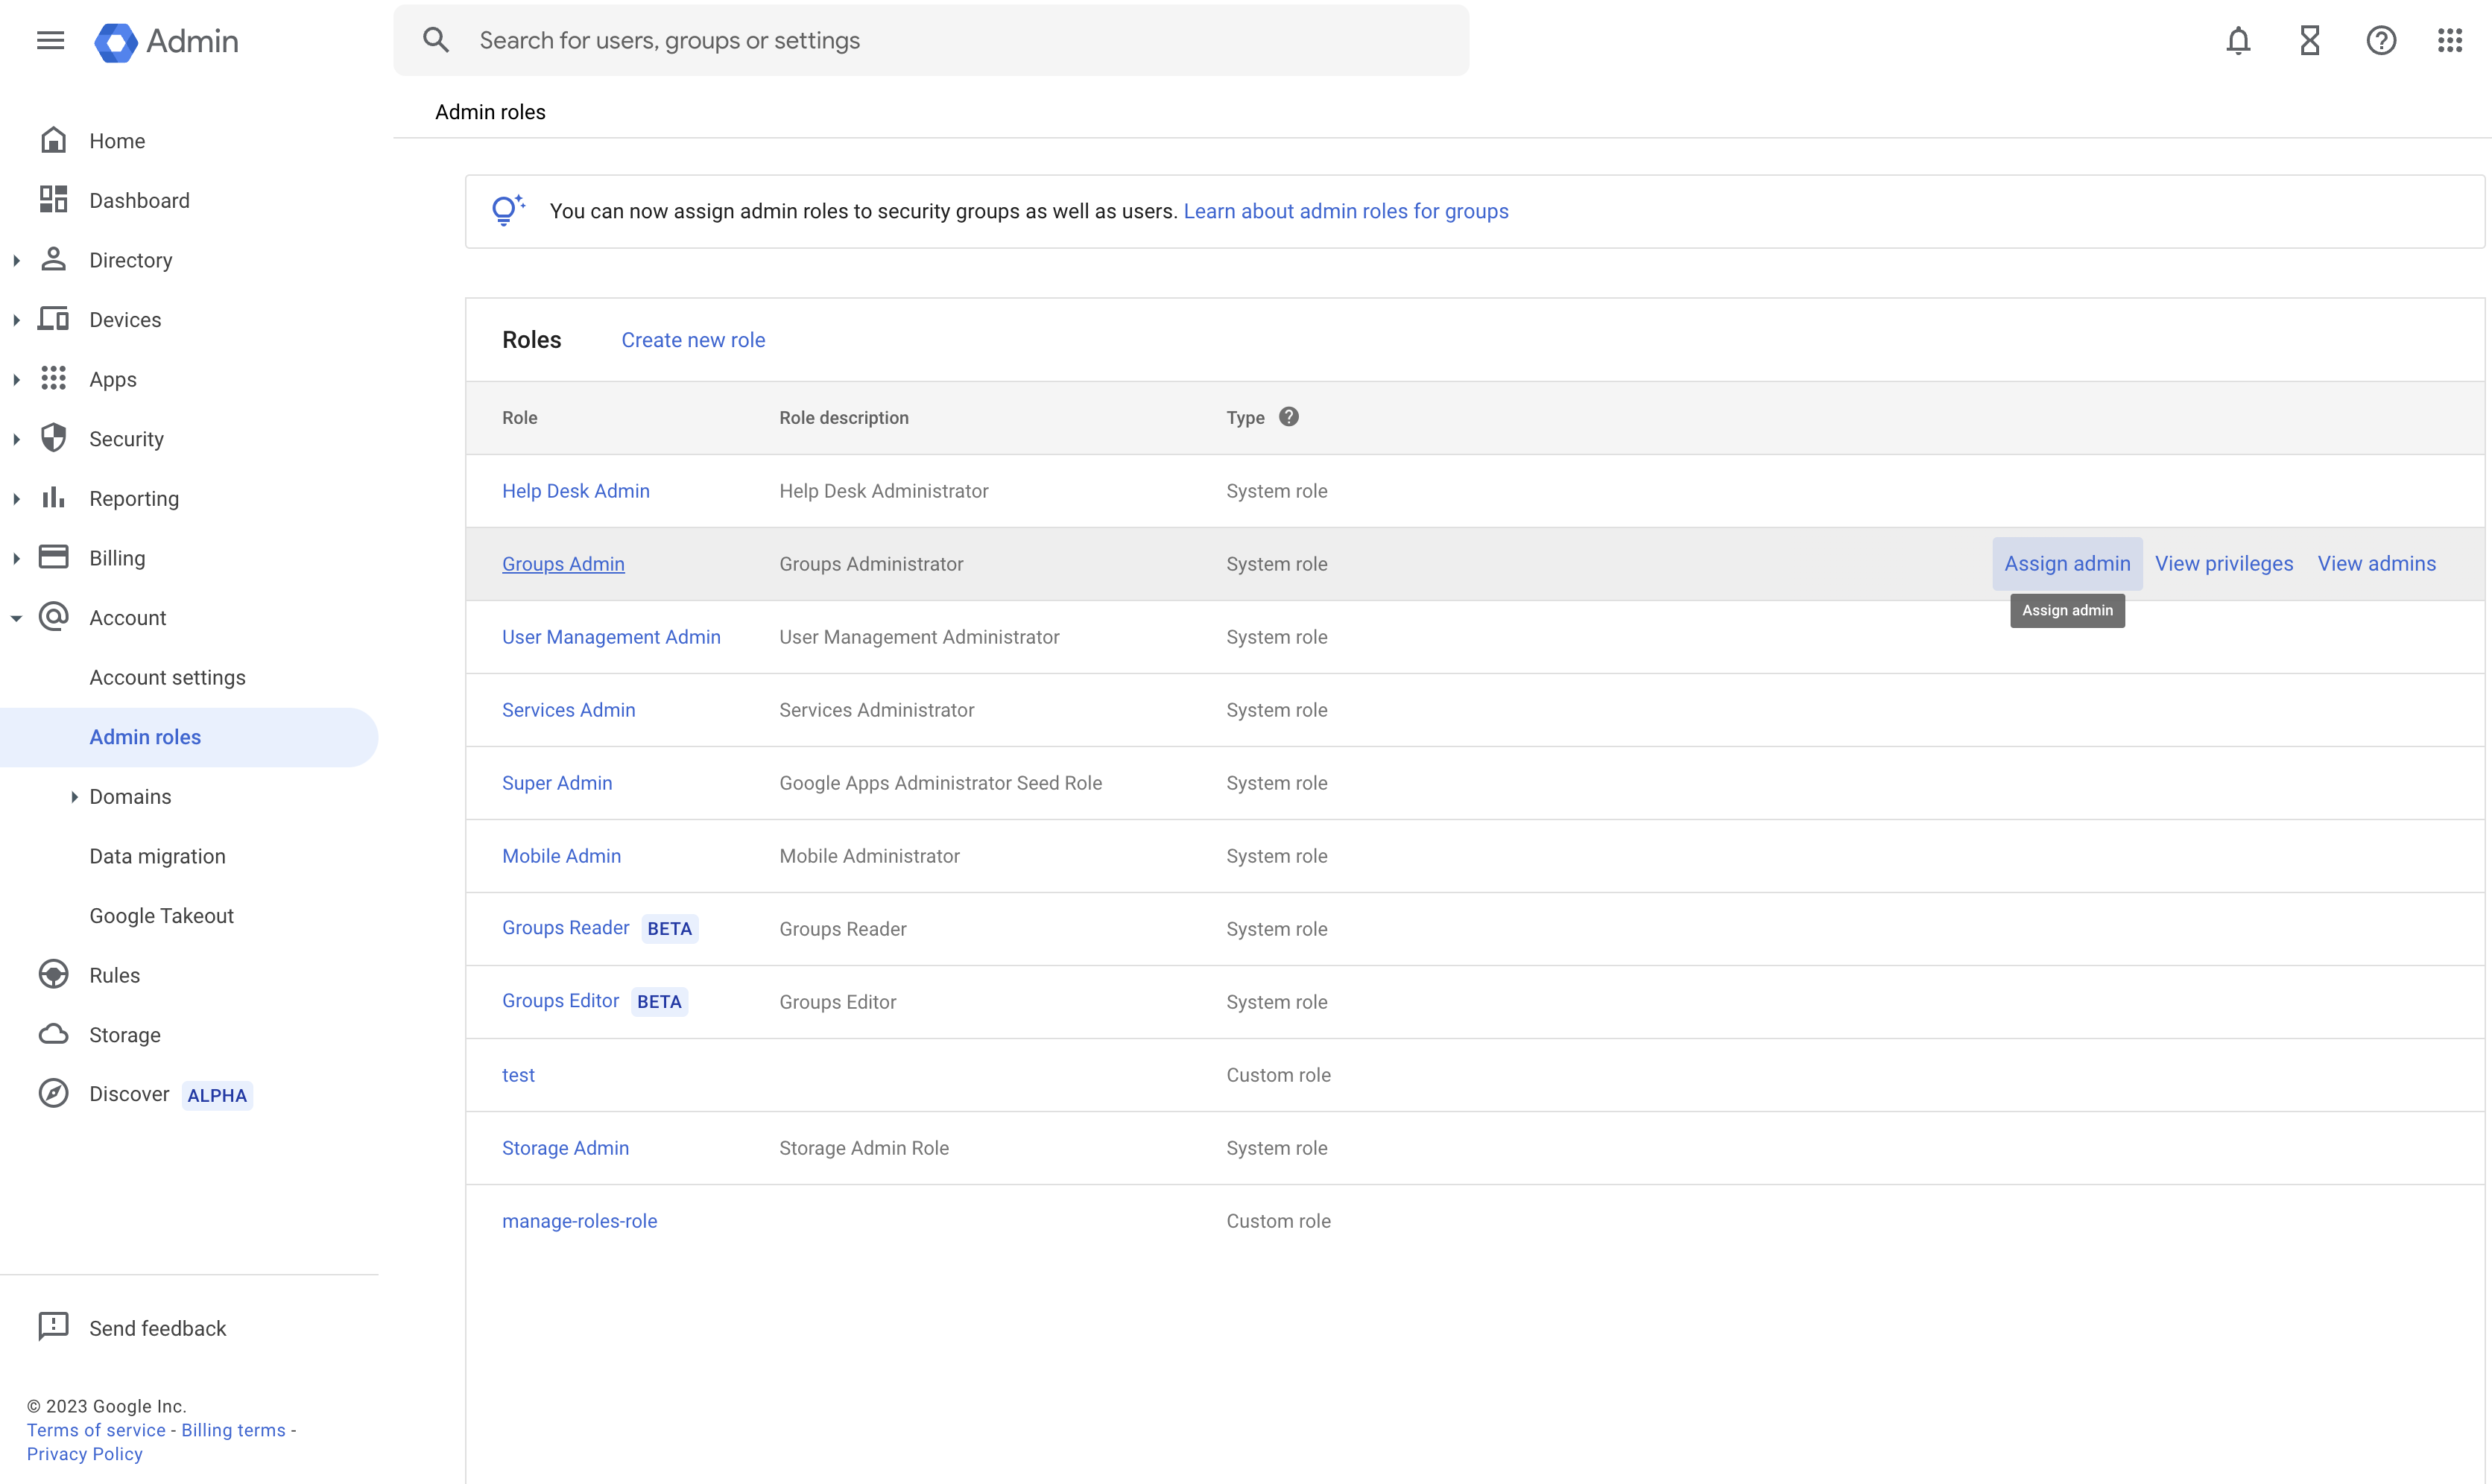 Admin roles page in Google Workspace